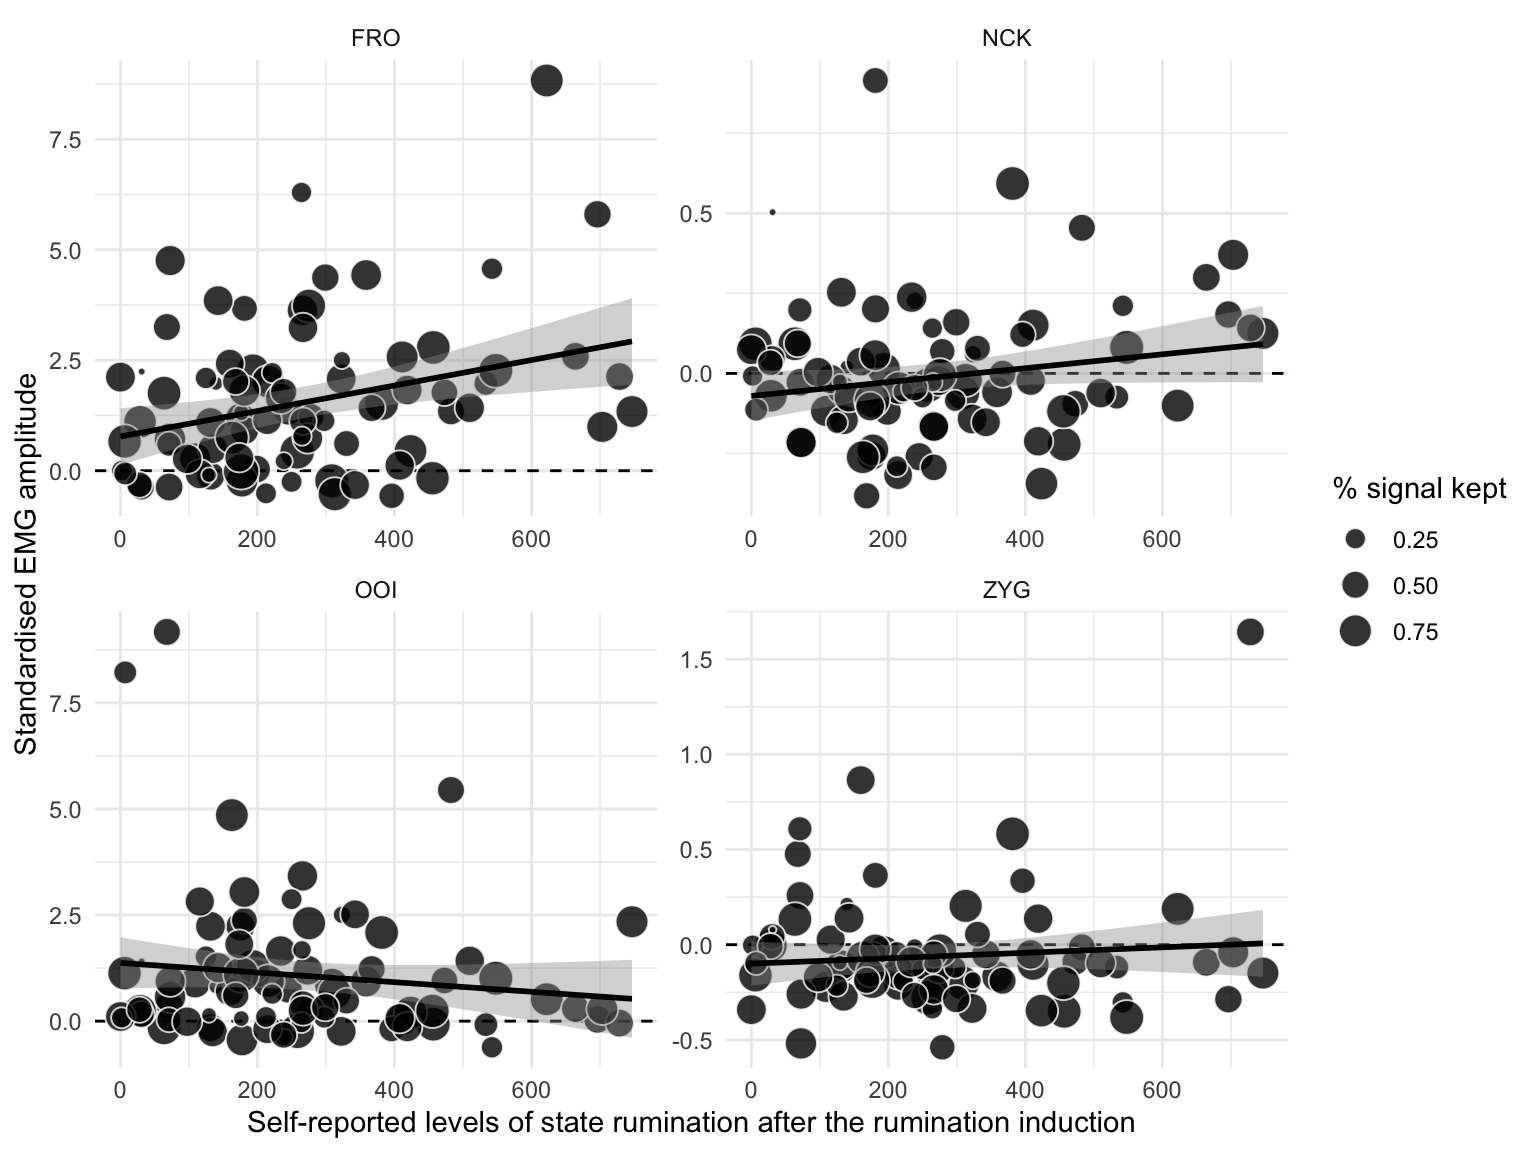 Relation between self-reported levels of state rumination (on the x-axis) and standardised EMG amplitude after the rumination induction (on the y-axis). The dots represent individual observations, whose size varies with the percentage of signal that was kept after removing artifacts. The black line represents the regression line with its 95\% CI.